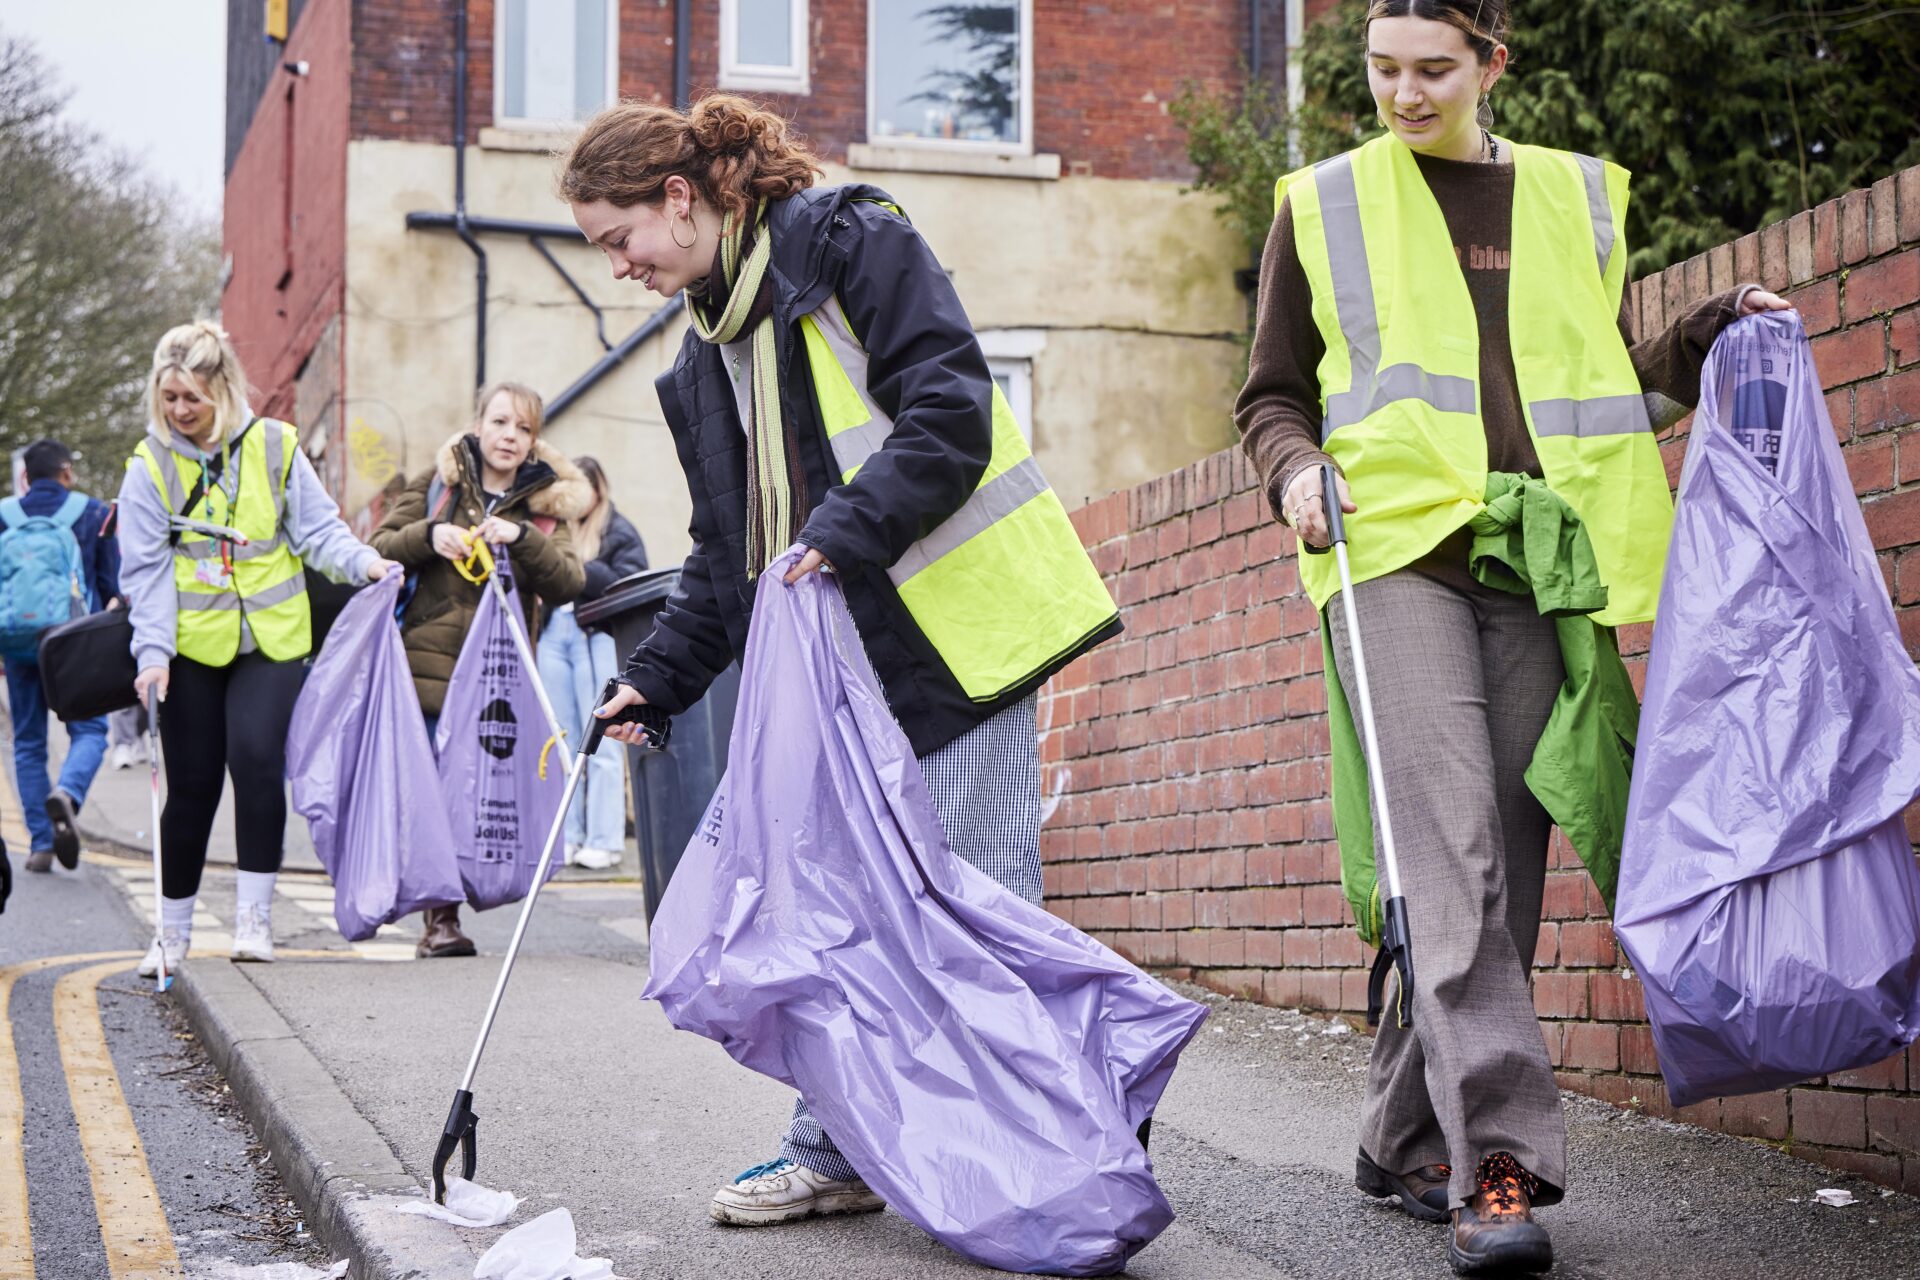 A group of people participating in a litter pick.